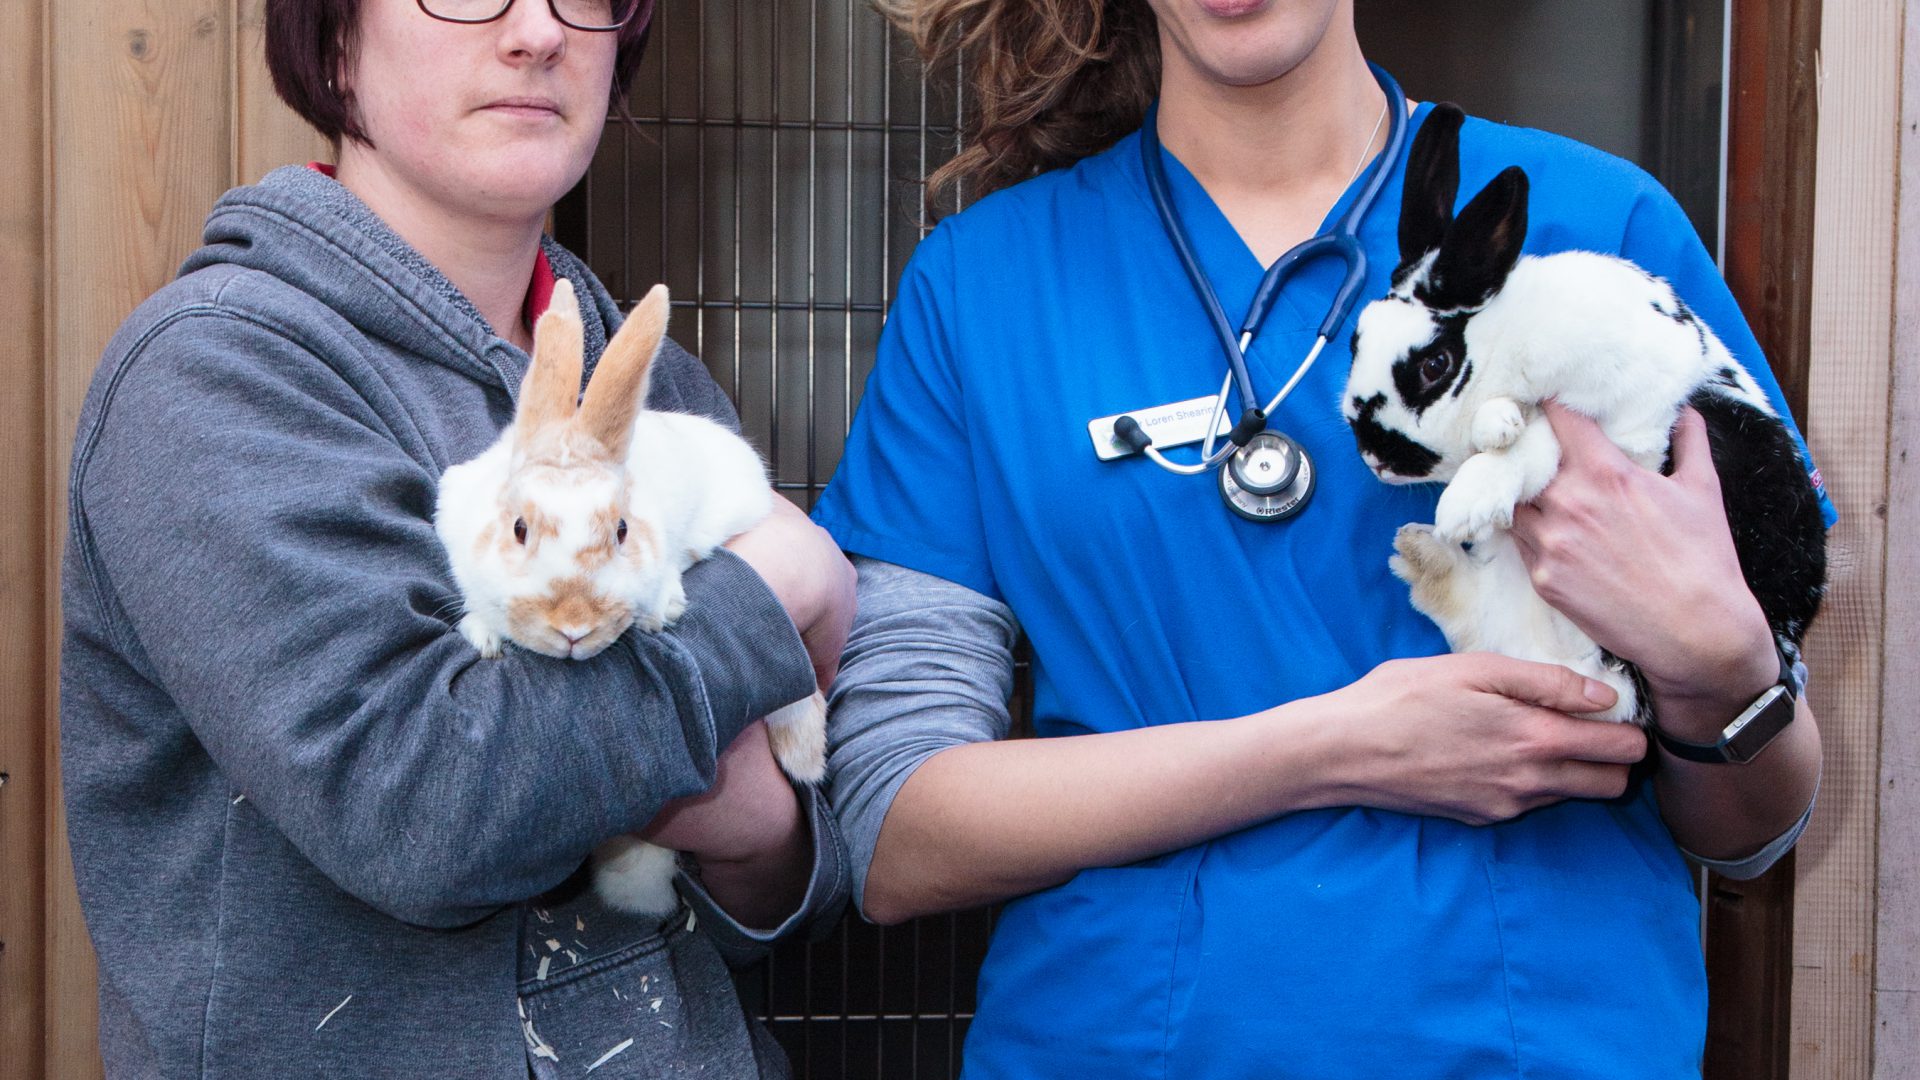 Rabbit owners urged to protect pets after RVHD-2 outbreak